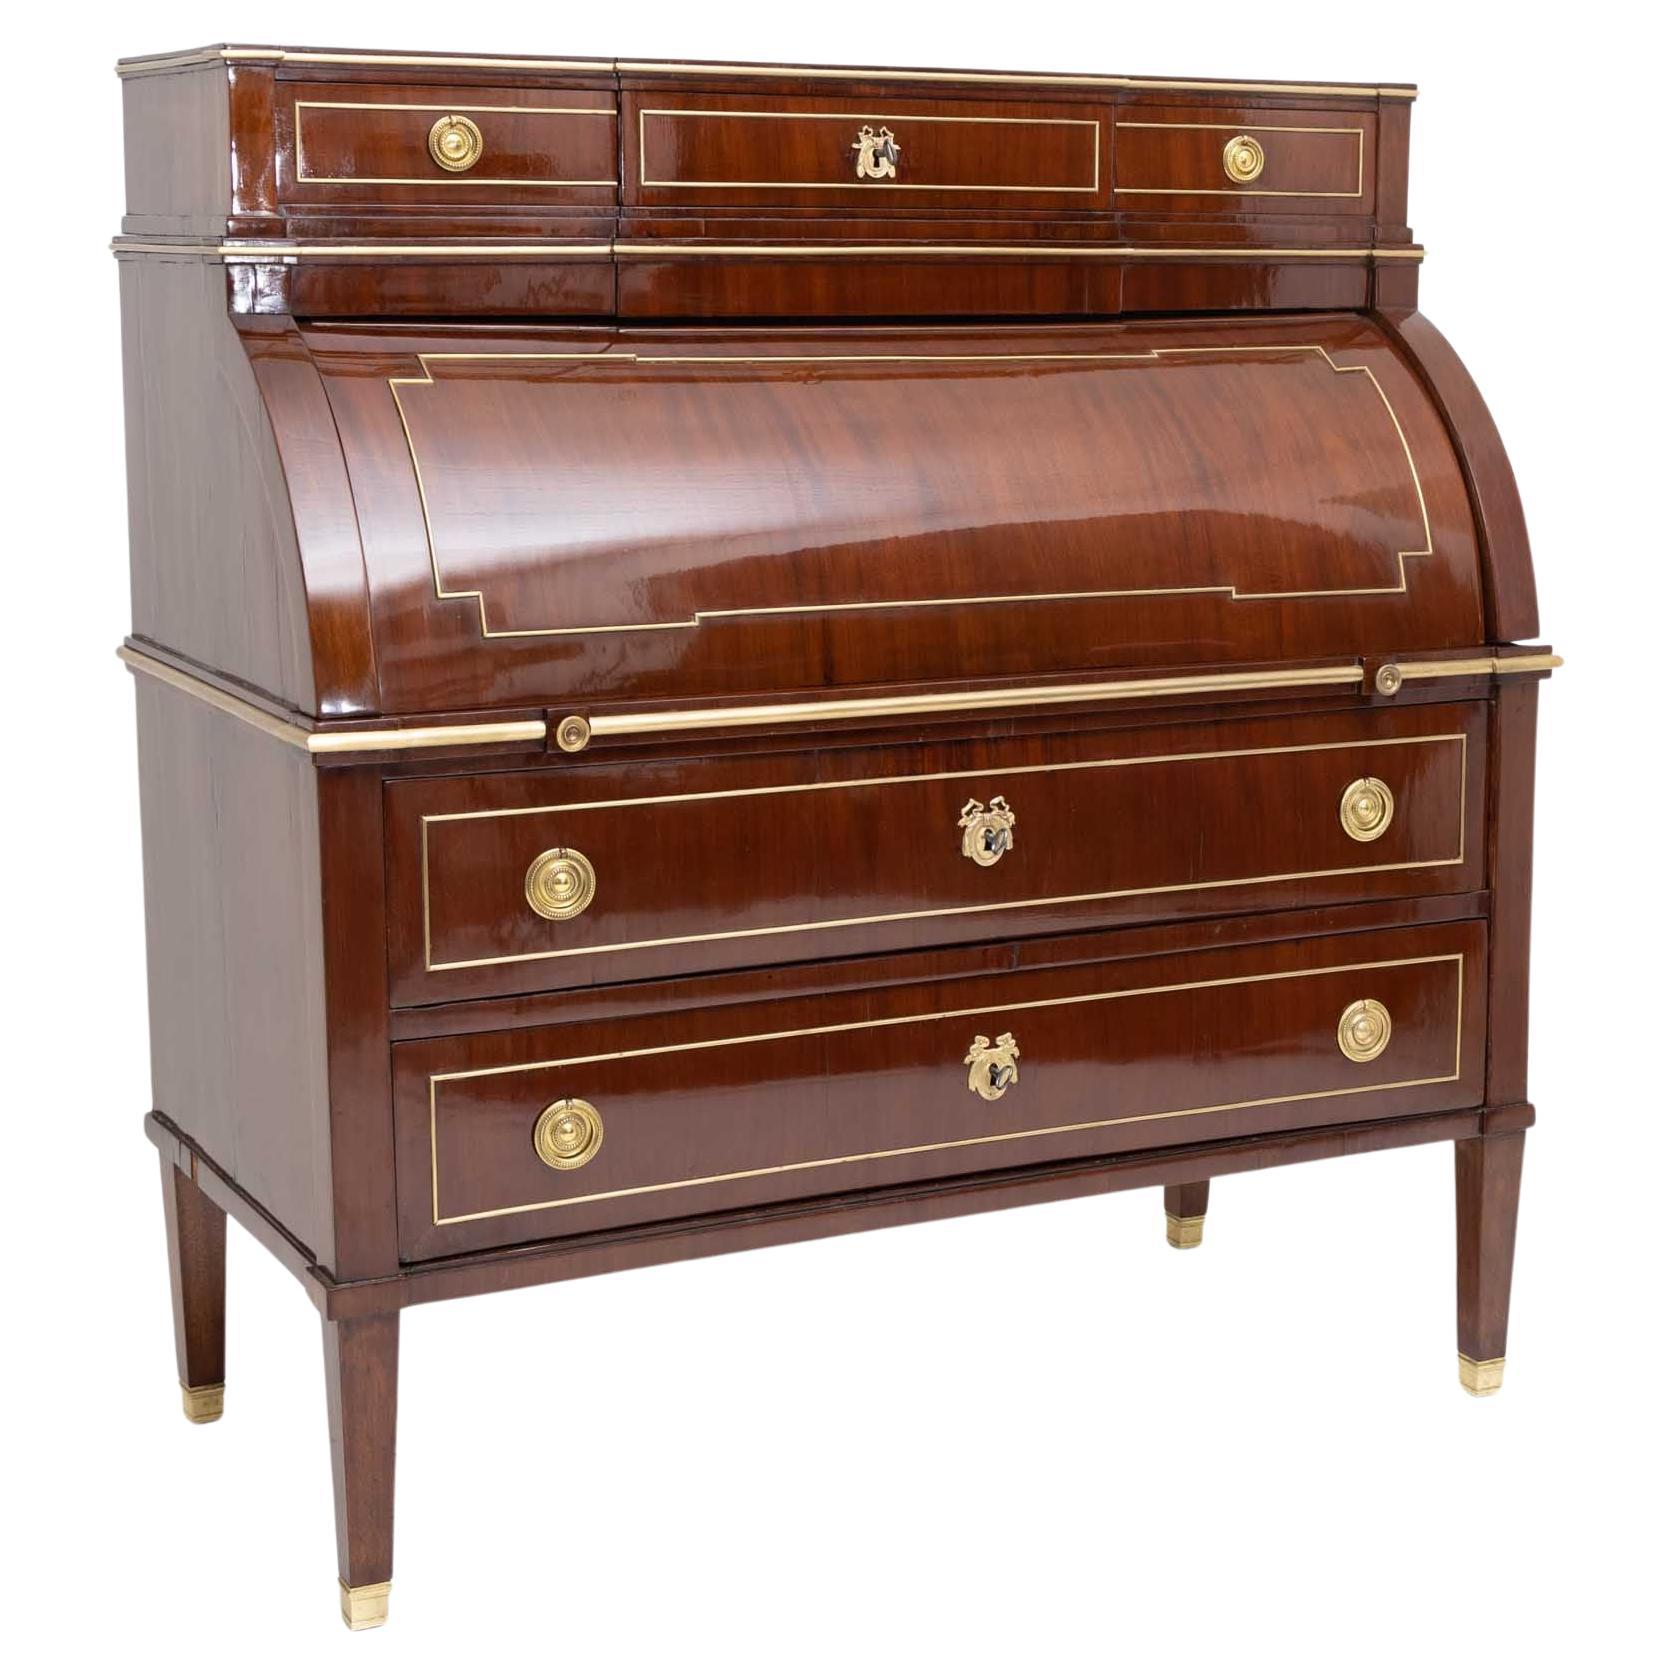 Louis Seize secretaire with mahogany veneer and brass moldings and fittings. The secretaire stands on square tapered legs with brass sabots and has three wide drawers, the top one protruding risalite-like in the center. The interior layout consists